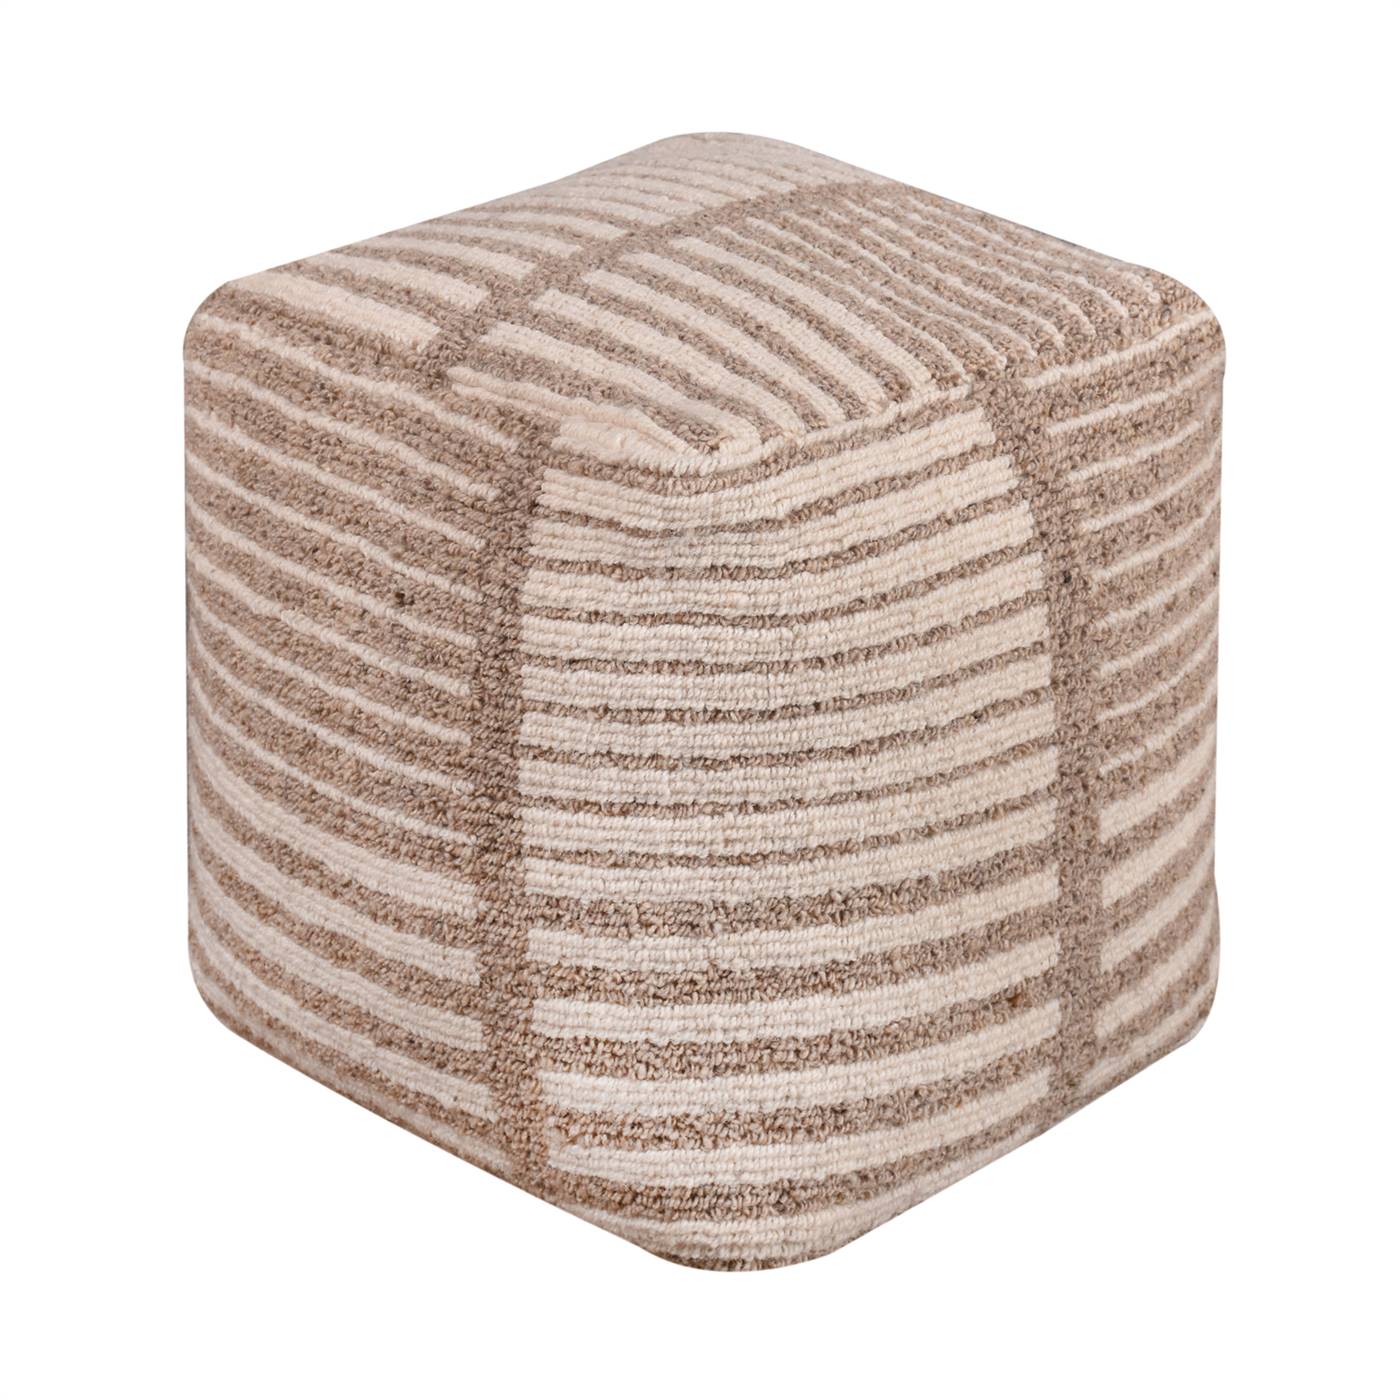 Henke Pouf, 40x40x40 cm, Natural White, Beige, Wool, Hand Woven, Handwoven, All Loop